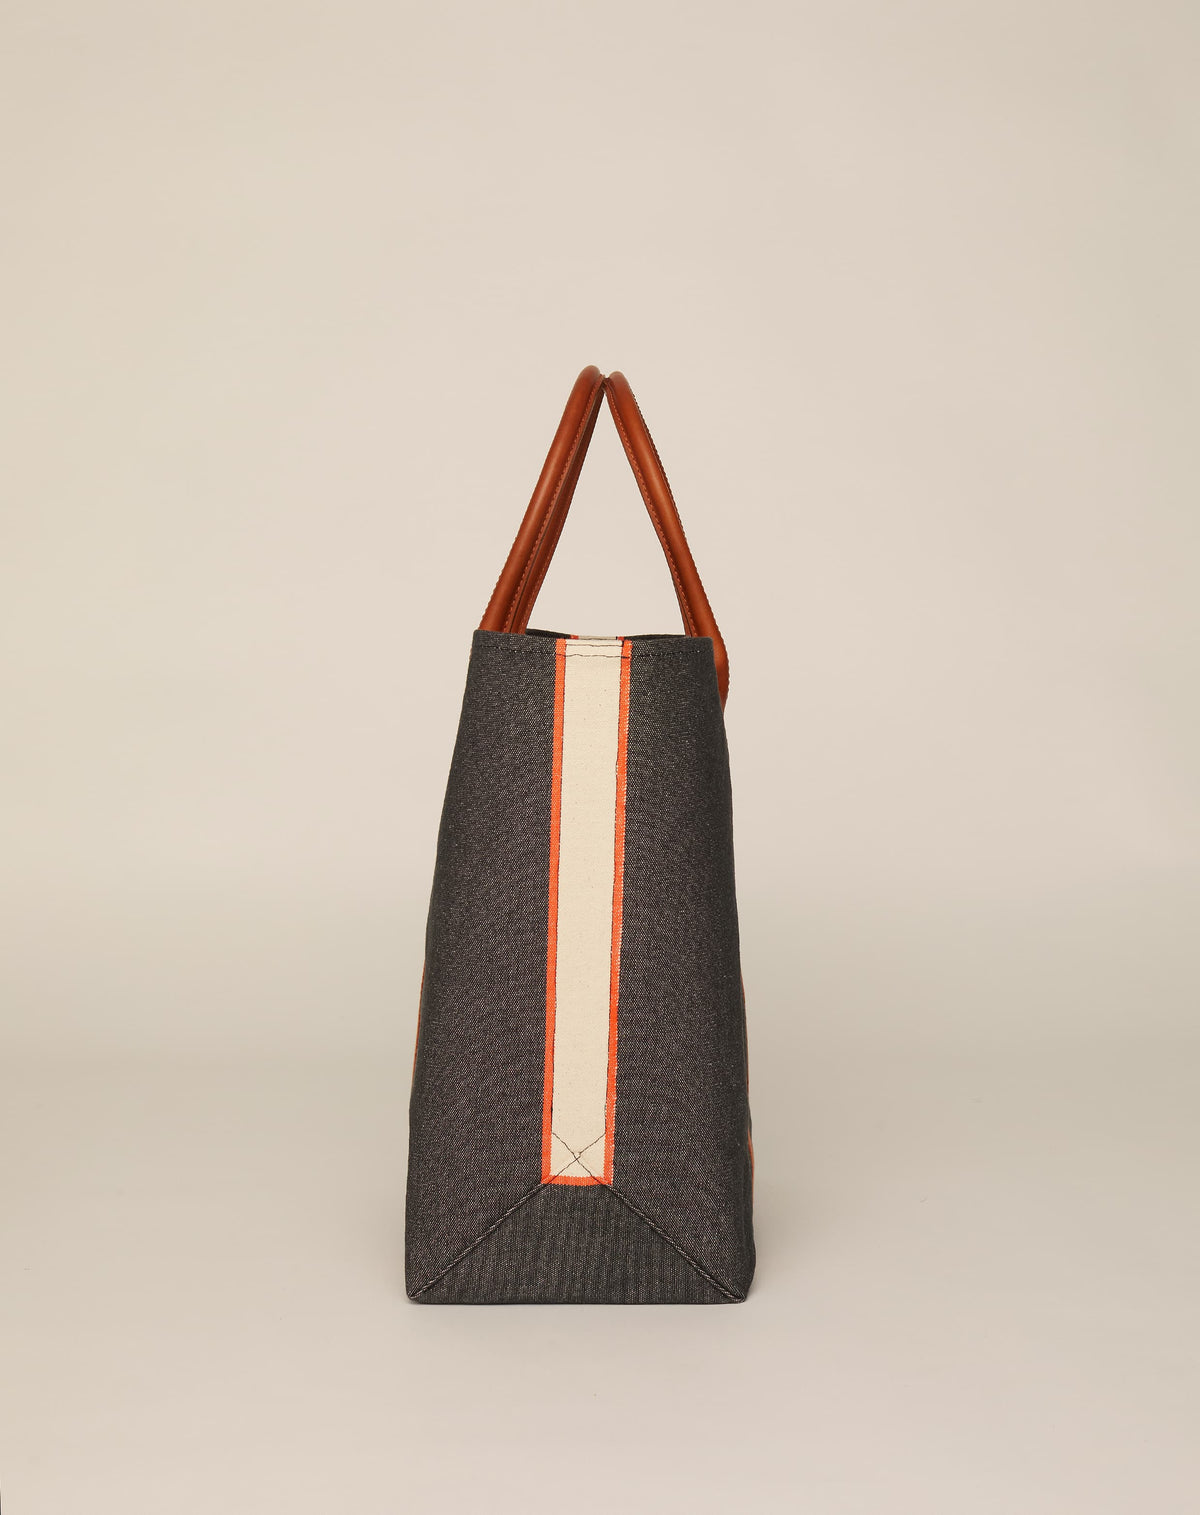 Side image of medium-sized classic canvas tote bag in washed black colour with tan leather handles and contrasting stripes.